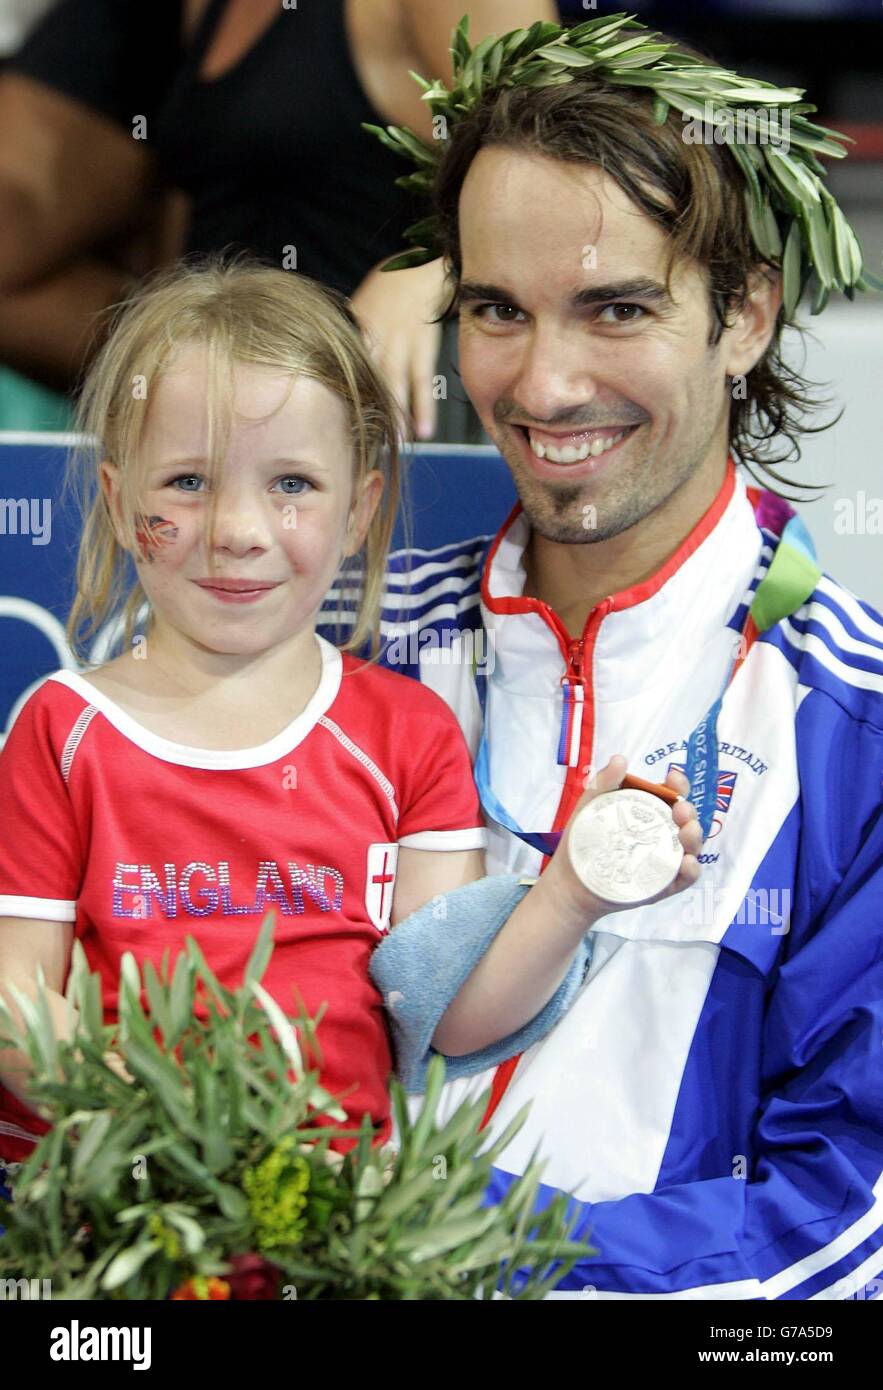 British badminton Silver Medal winner Nathan Robertson with his daughter Neve following his Gold Medal Mixed Doubles match with partner Gail Emms at the Goudi Olympic Hall in Athens, Greece. Emms and Robertson lost to China's Jun Zhang and Ling Gao 1-15 15-12 12-15. Stock Photo